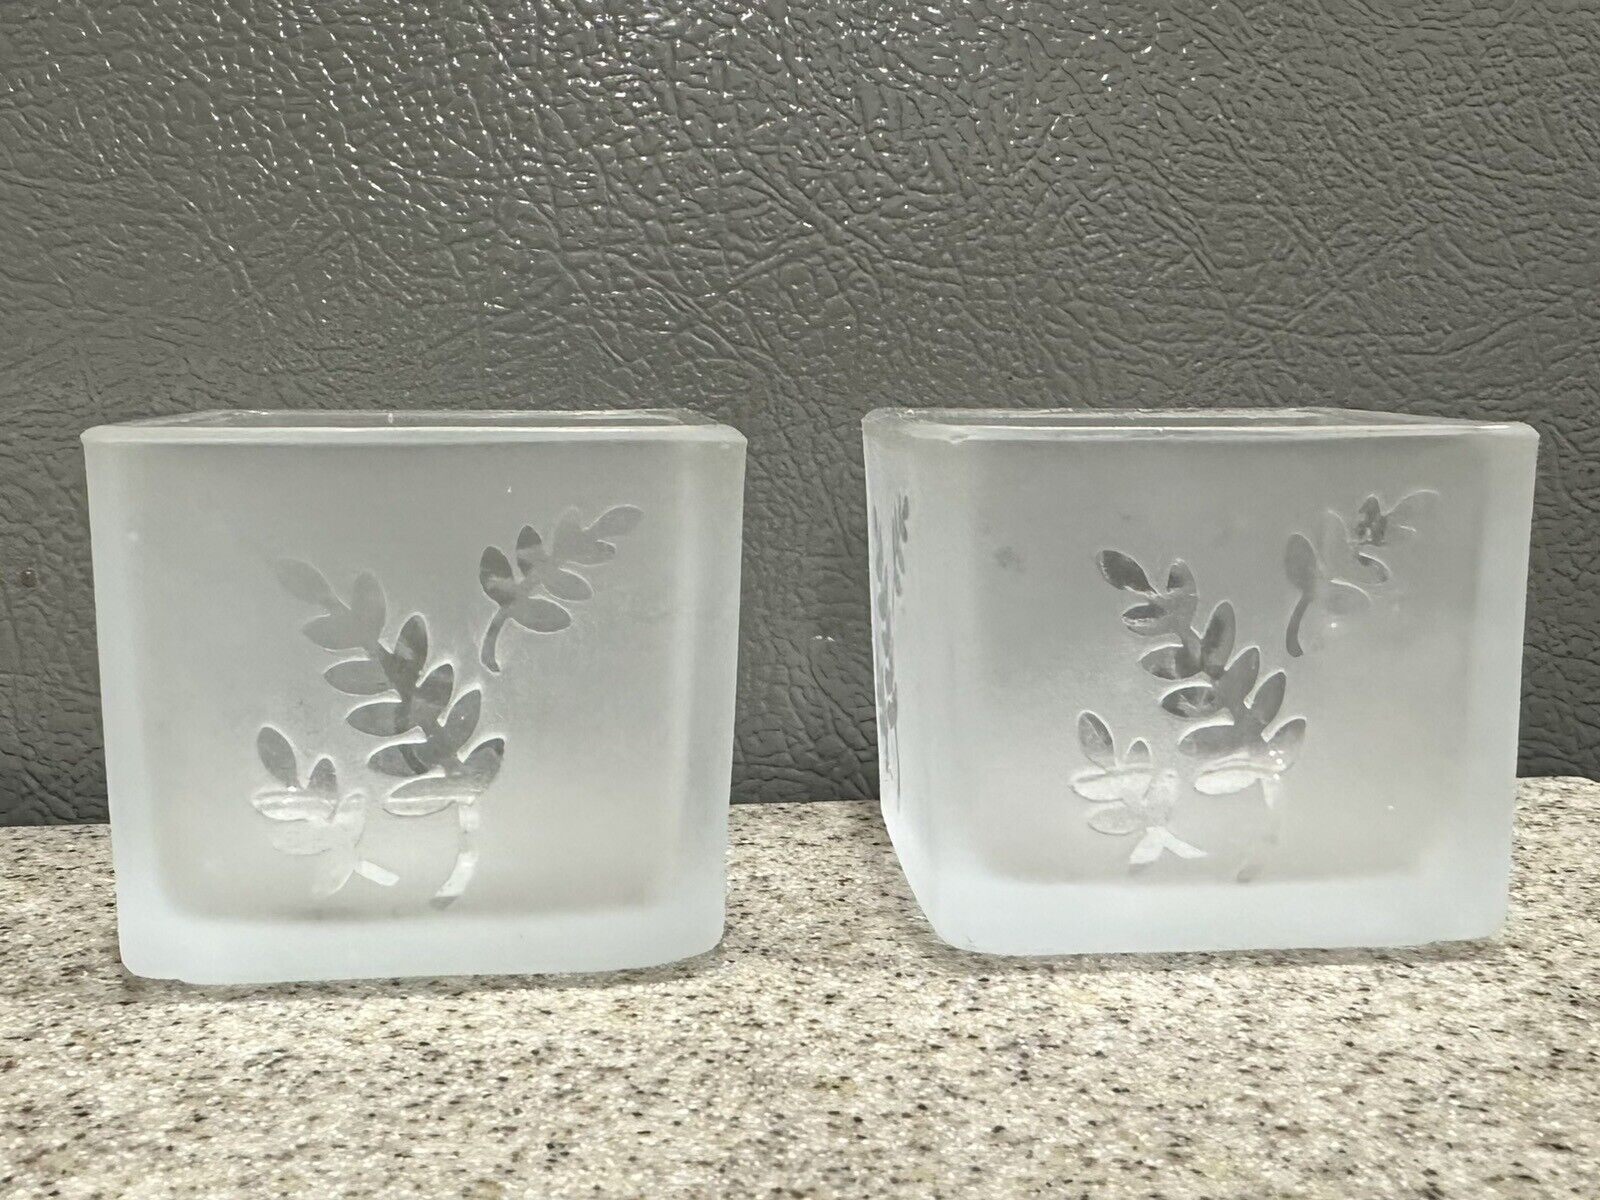 2 PartyLite P7235 Frosted Leaf Votive Square Candle Holders Original Box Unused